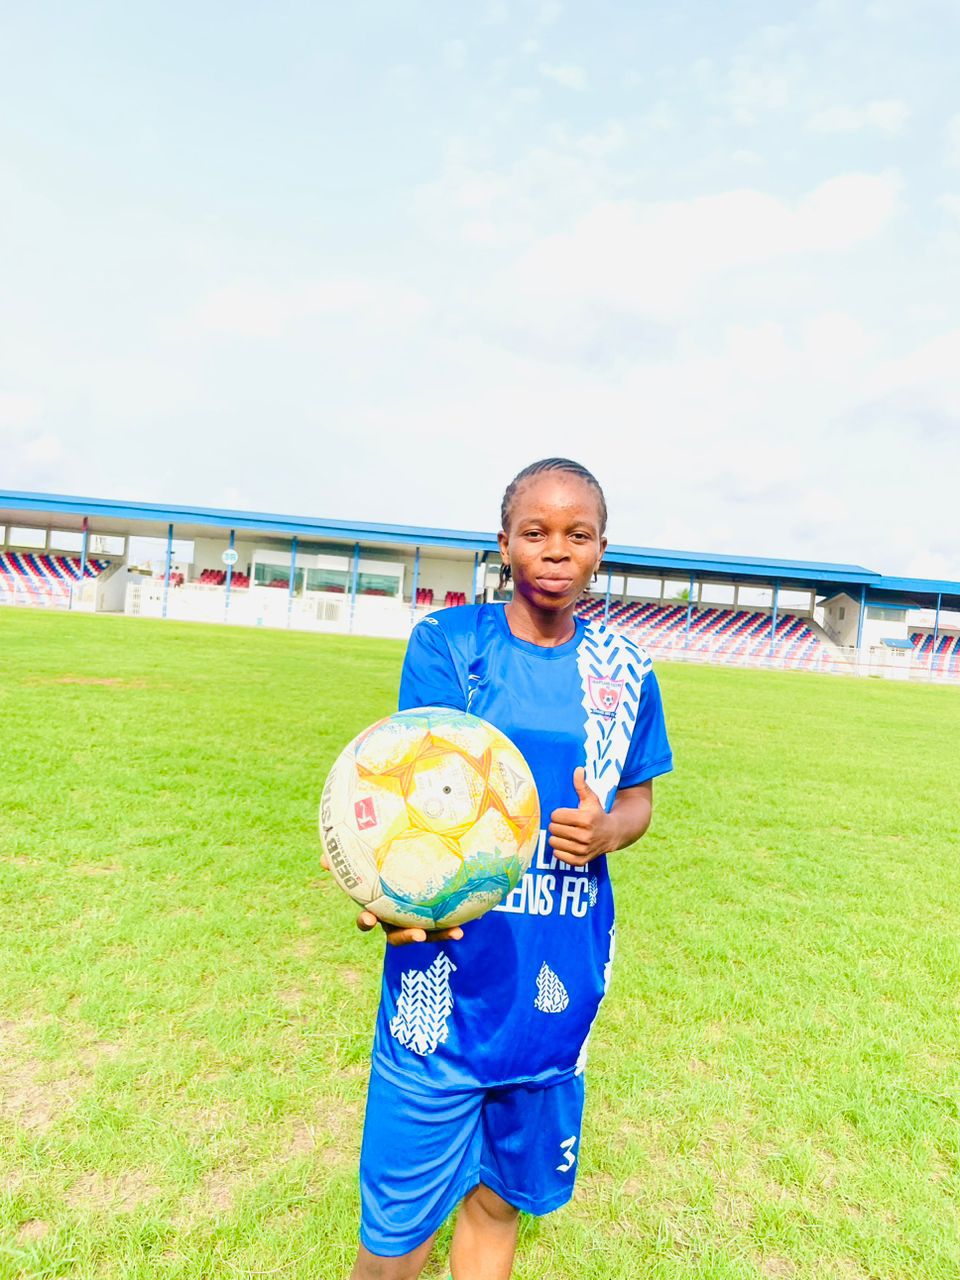 NWFL MD 12: Expect goals against Confluence Queens - Heartland Queens Yetunde Anyantosho talks tough